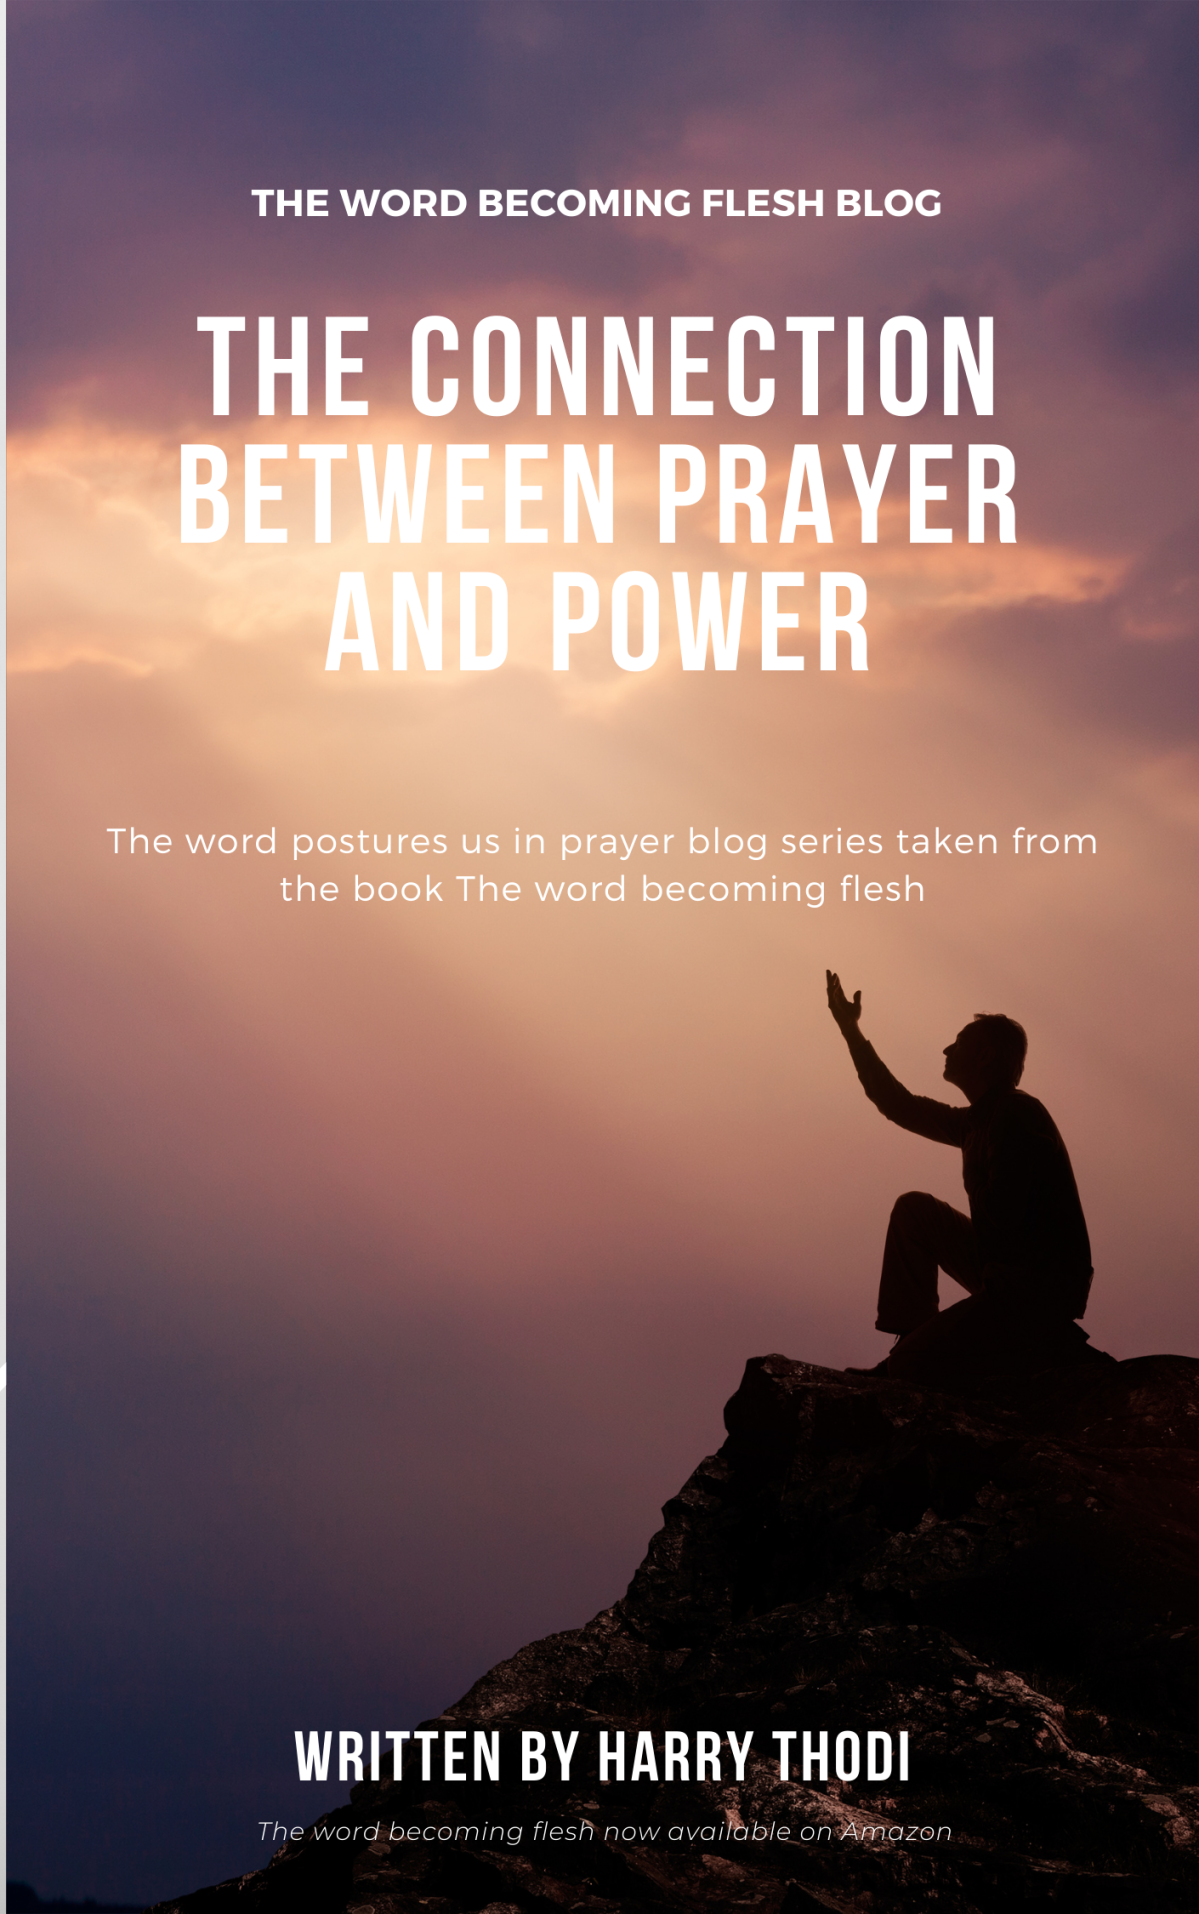 The Connection Between Prayer and Power